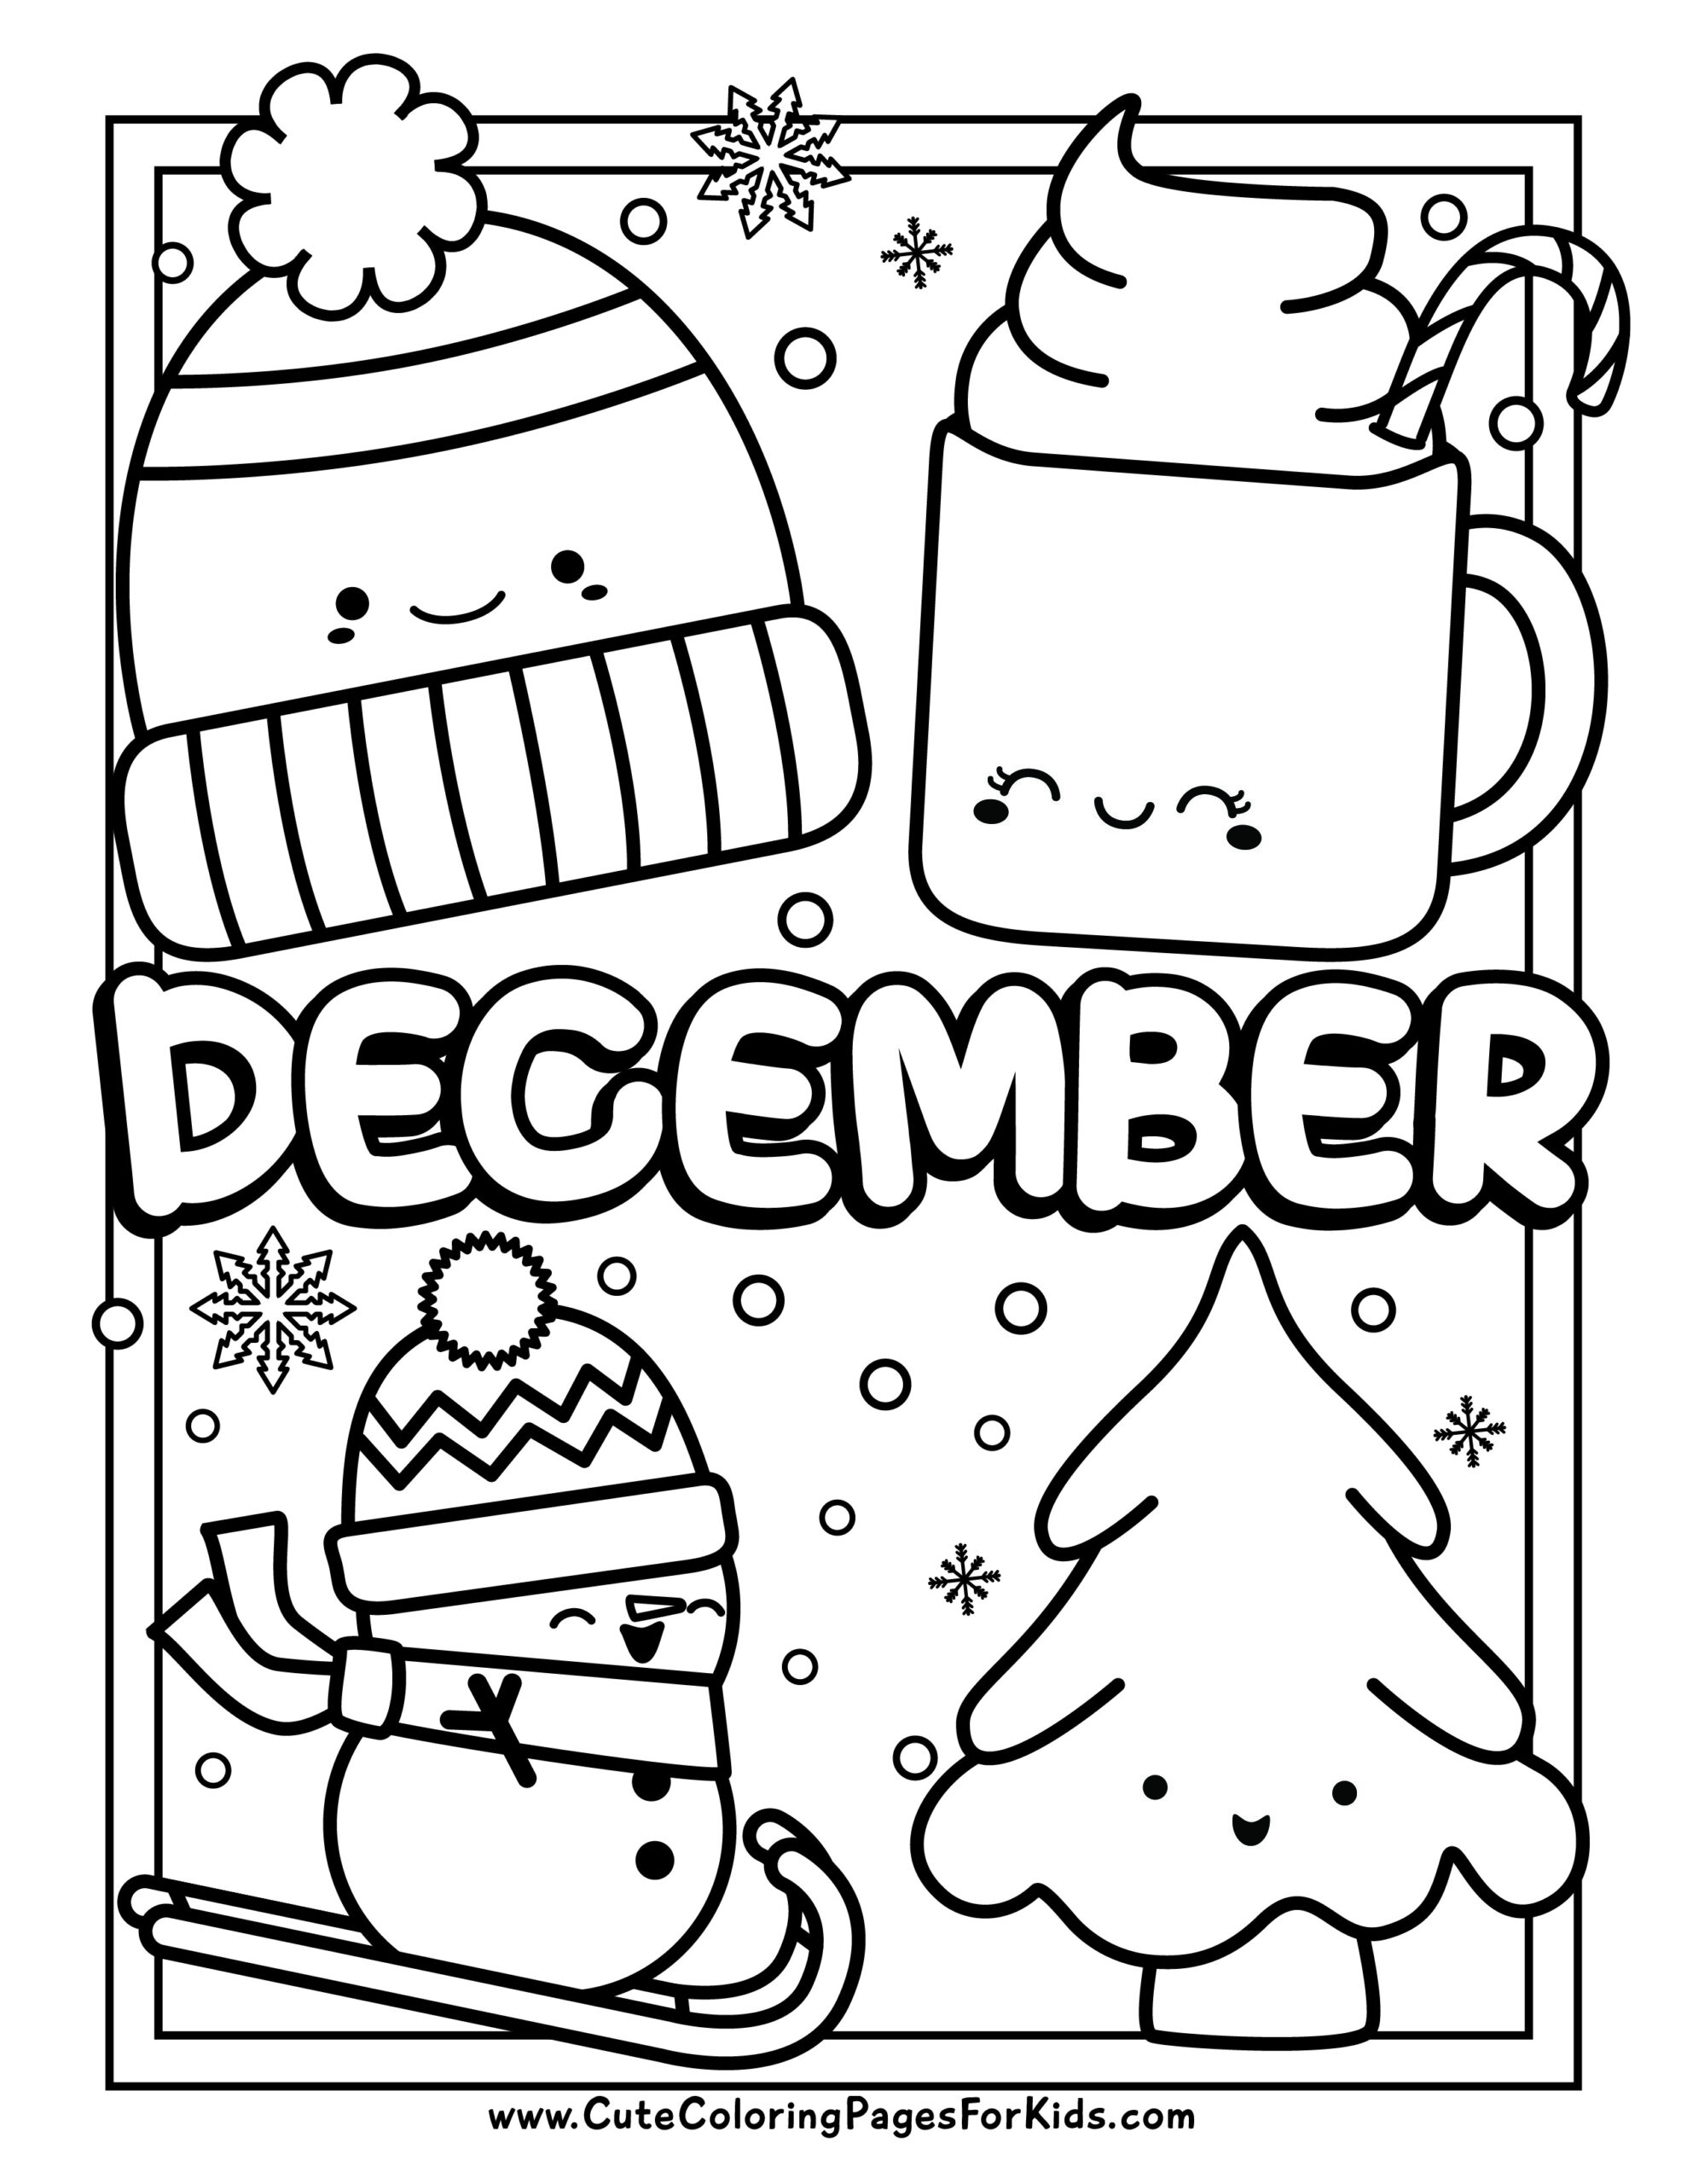 Free Printable My Color Book Coloring Pages Activity » Share & Remember